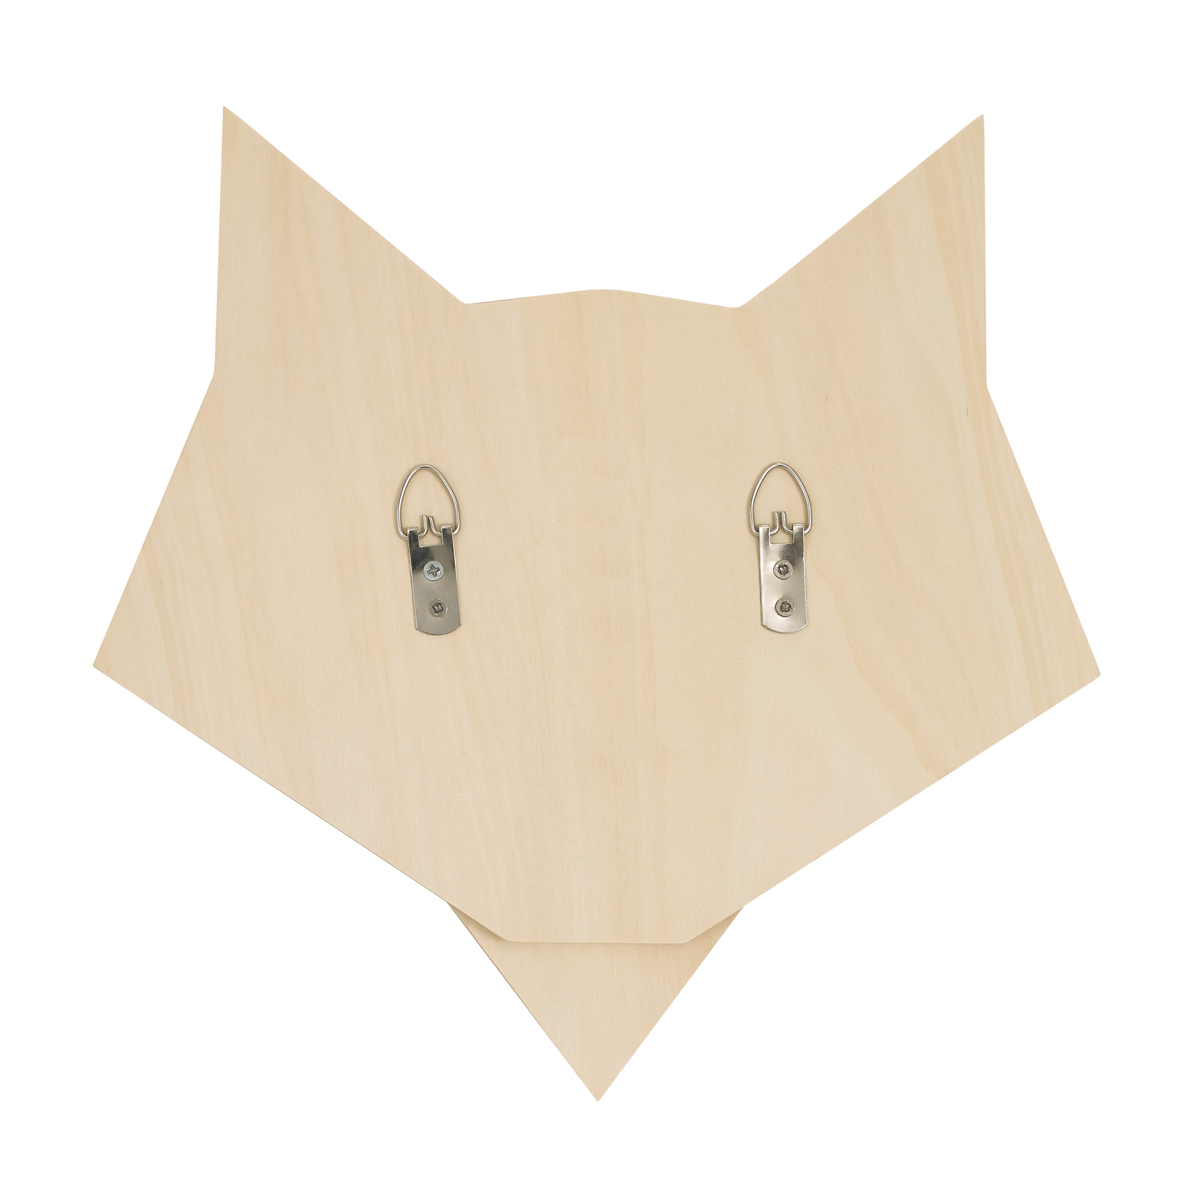 Little Love By NoJo Wood Layered Fox Wall Decor